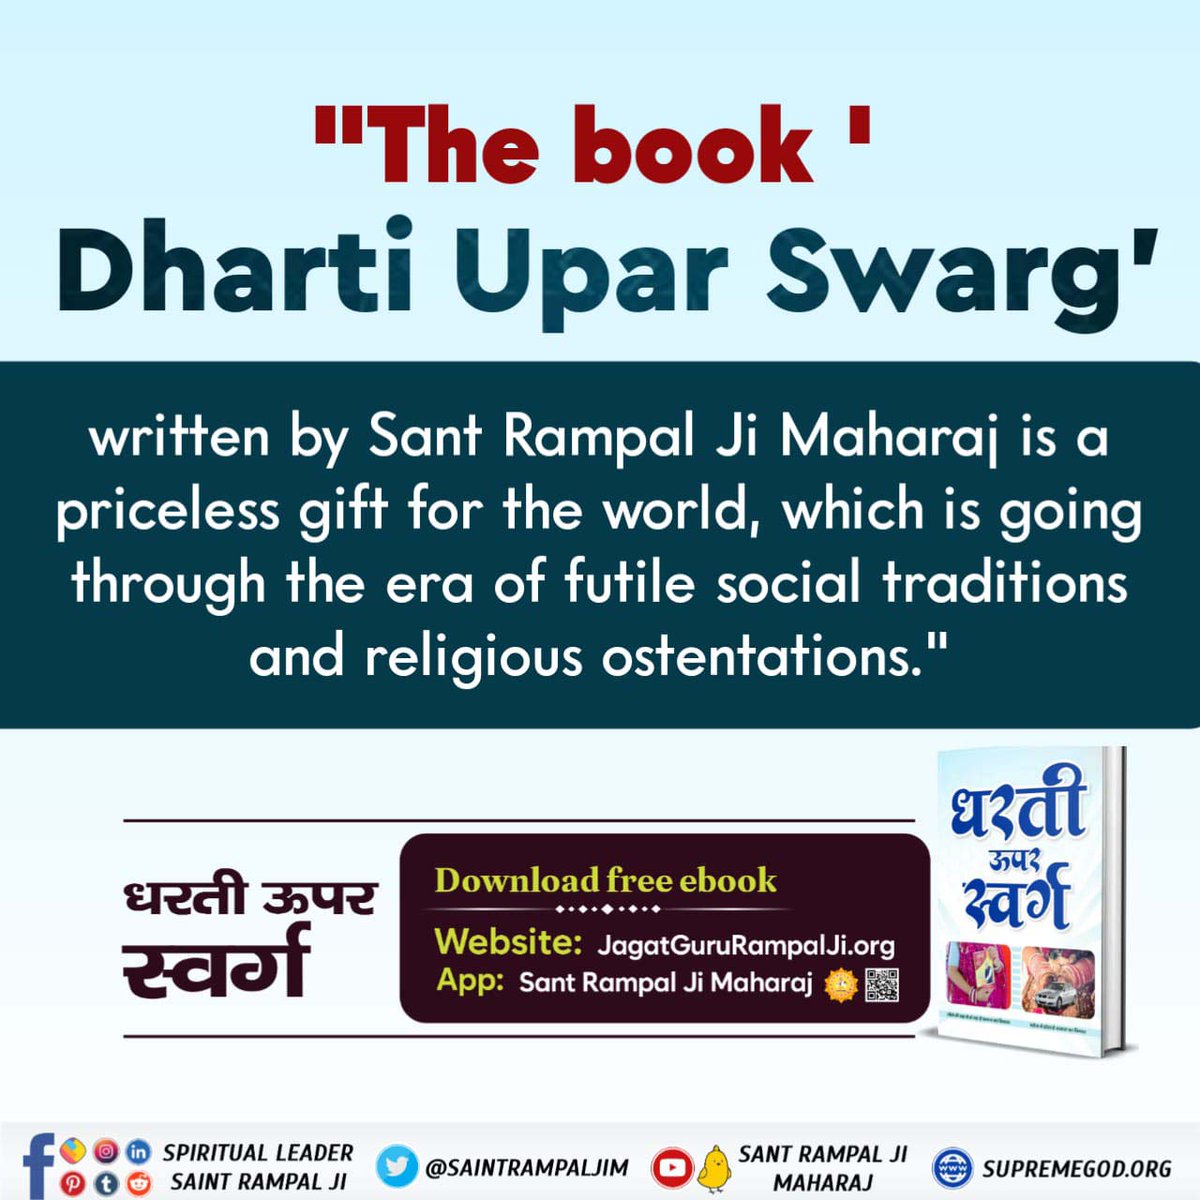 #GodMorningTuesday The (jaap) recitation of 'Om' mantra is of Brahm. By its worship, one goes to Brahm Lok about which it is mentioned in Gita Chapter 8 Verse 16 that the worshippers who go to Brahm Lok also have rebirth.